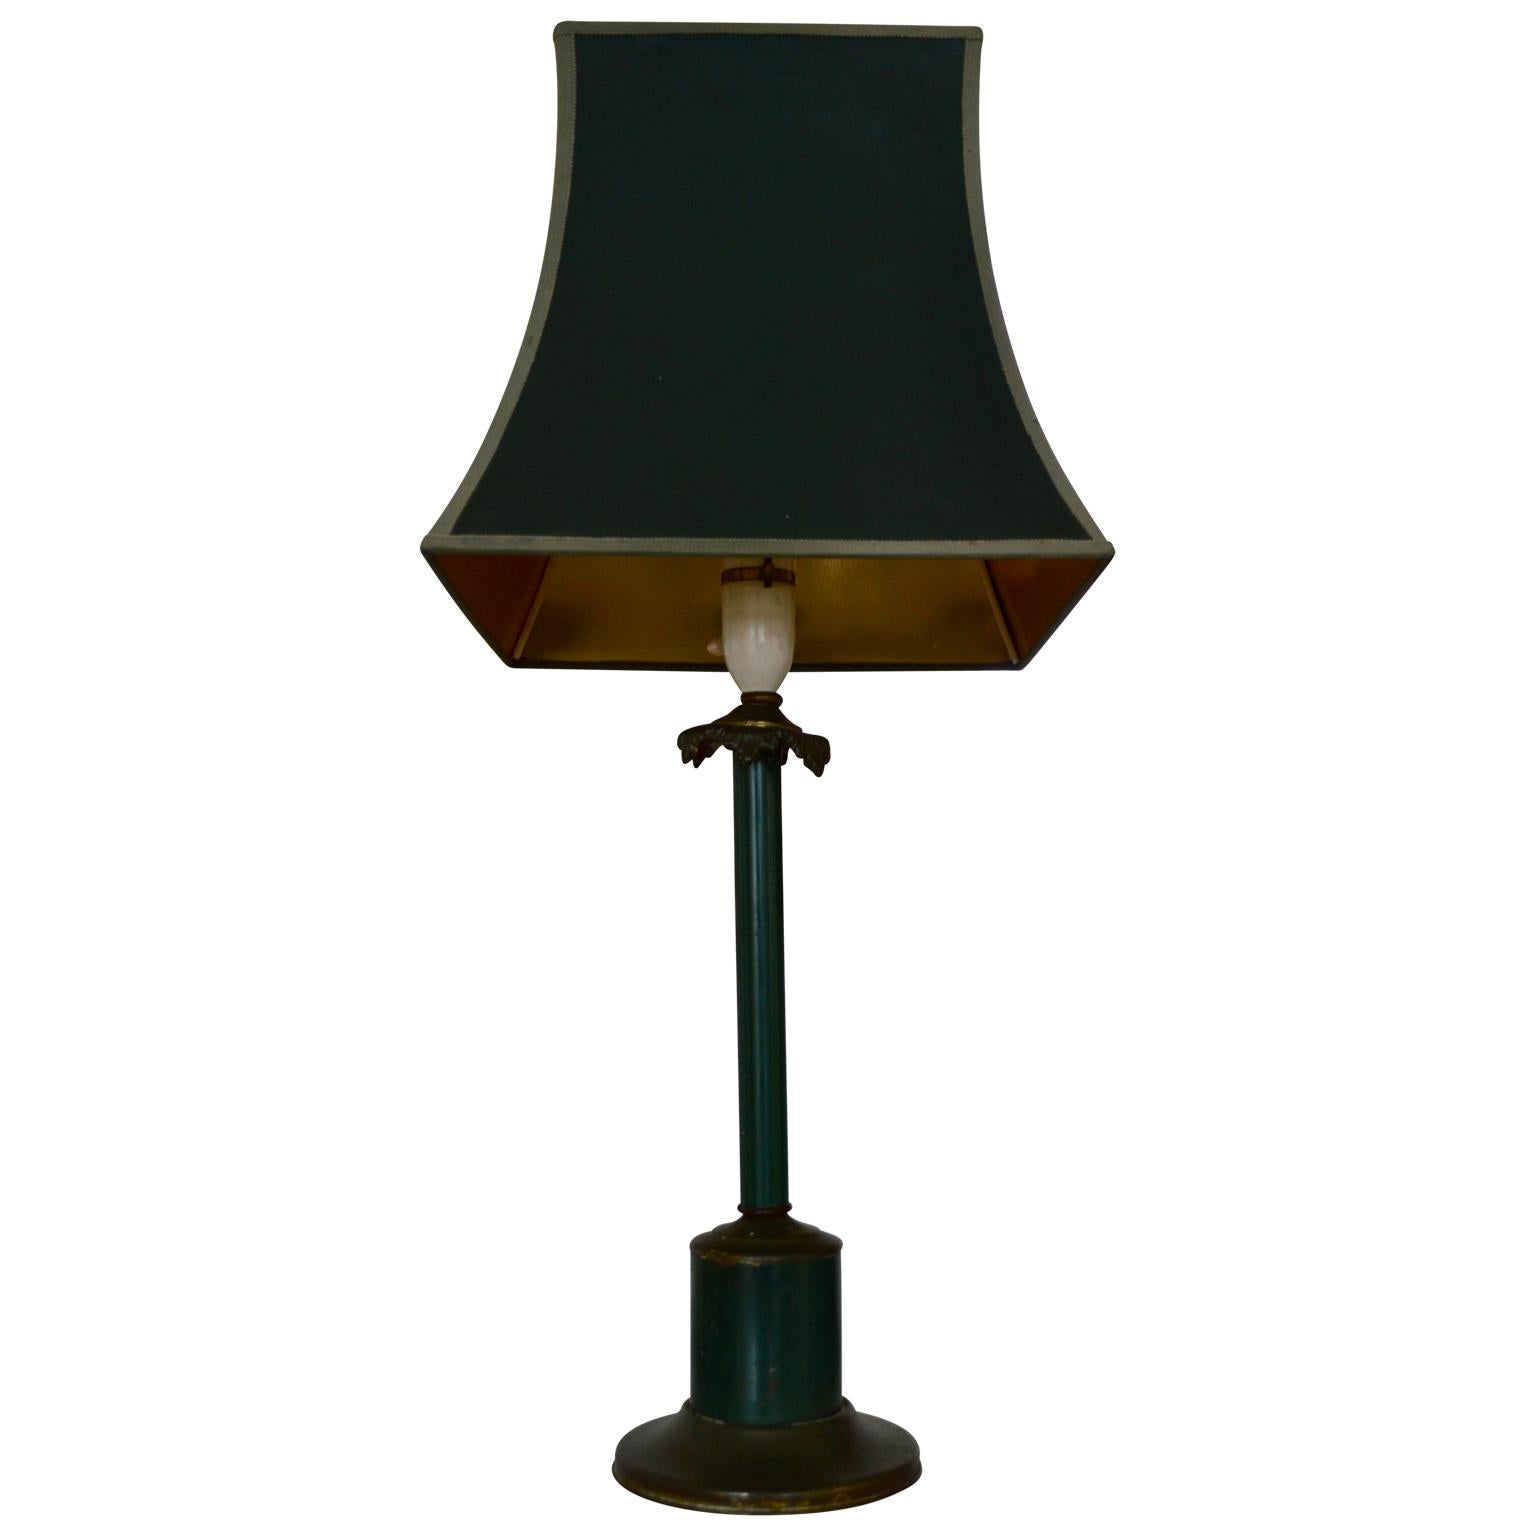 A column-shaped 1920s Neo-classical toleware and bronze table lamp.
Then base has a green paint and patinated finish, with acanthus leaves around the neck.